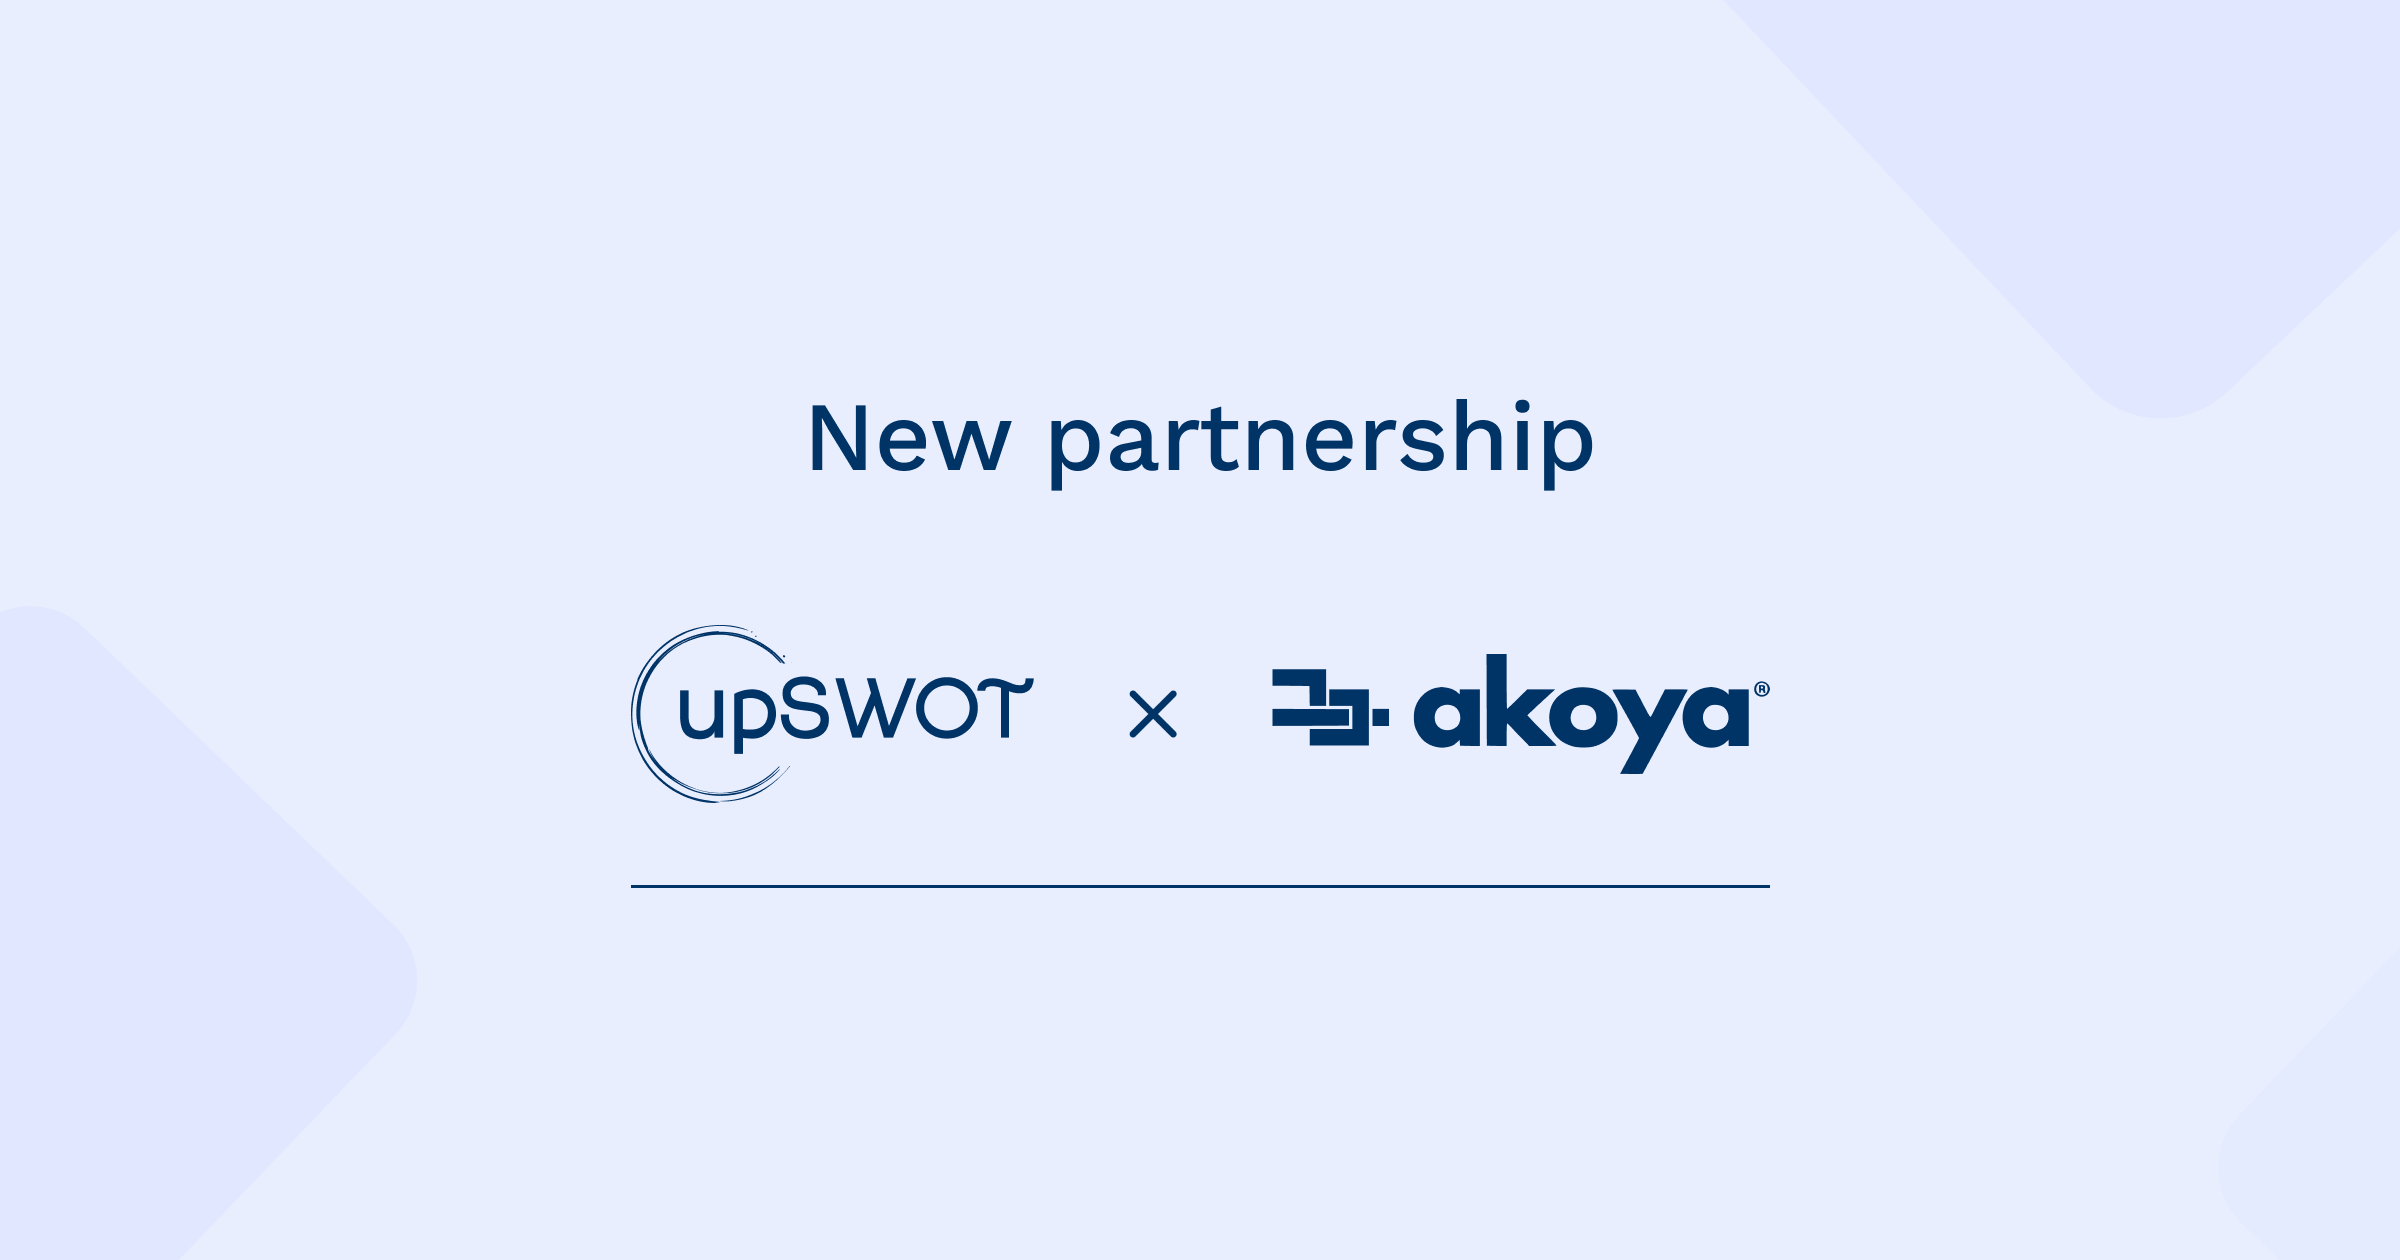 Akoya And upSWOT Partner to Give Small Business Customers Control Of Their Data And Actionable Insights